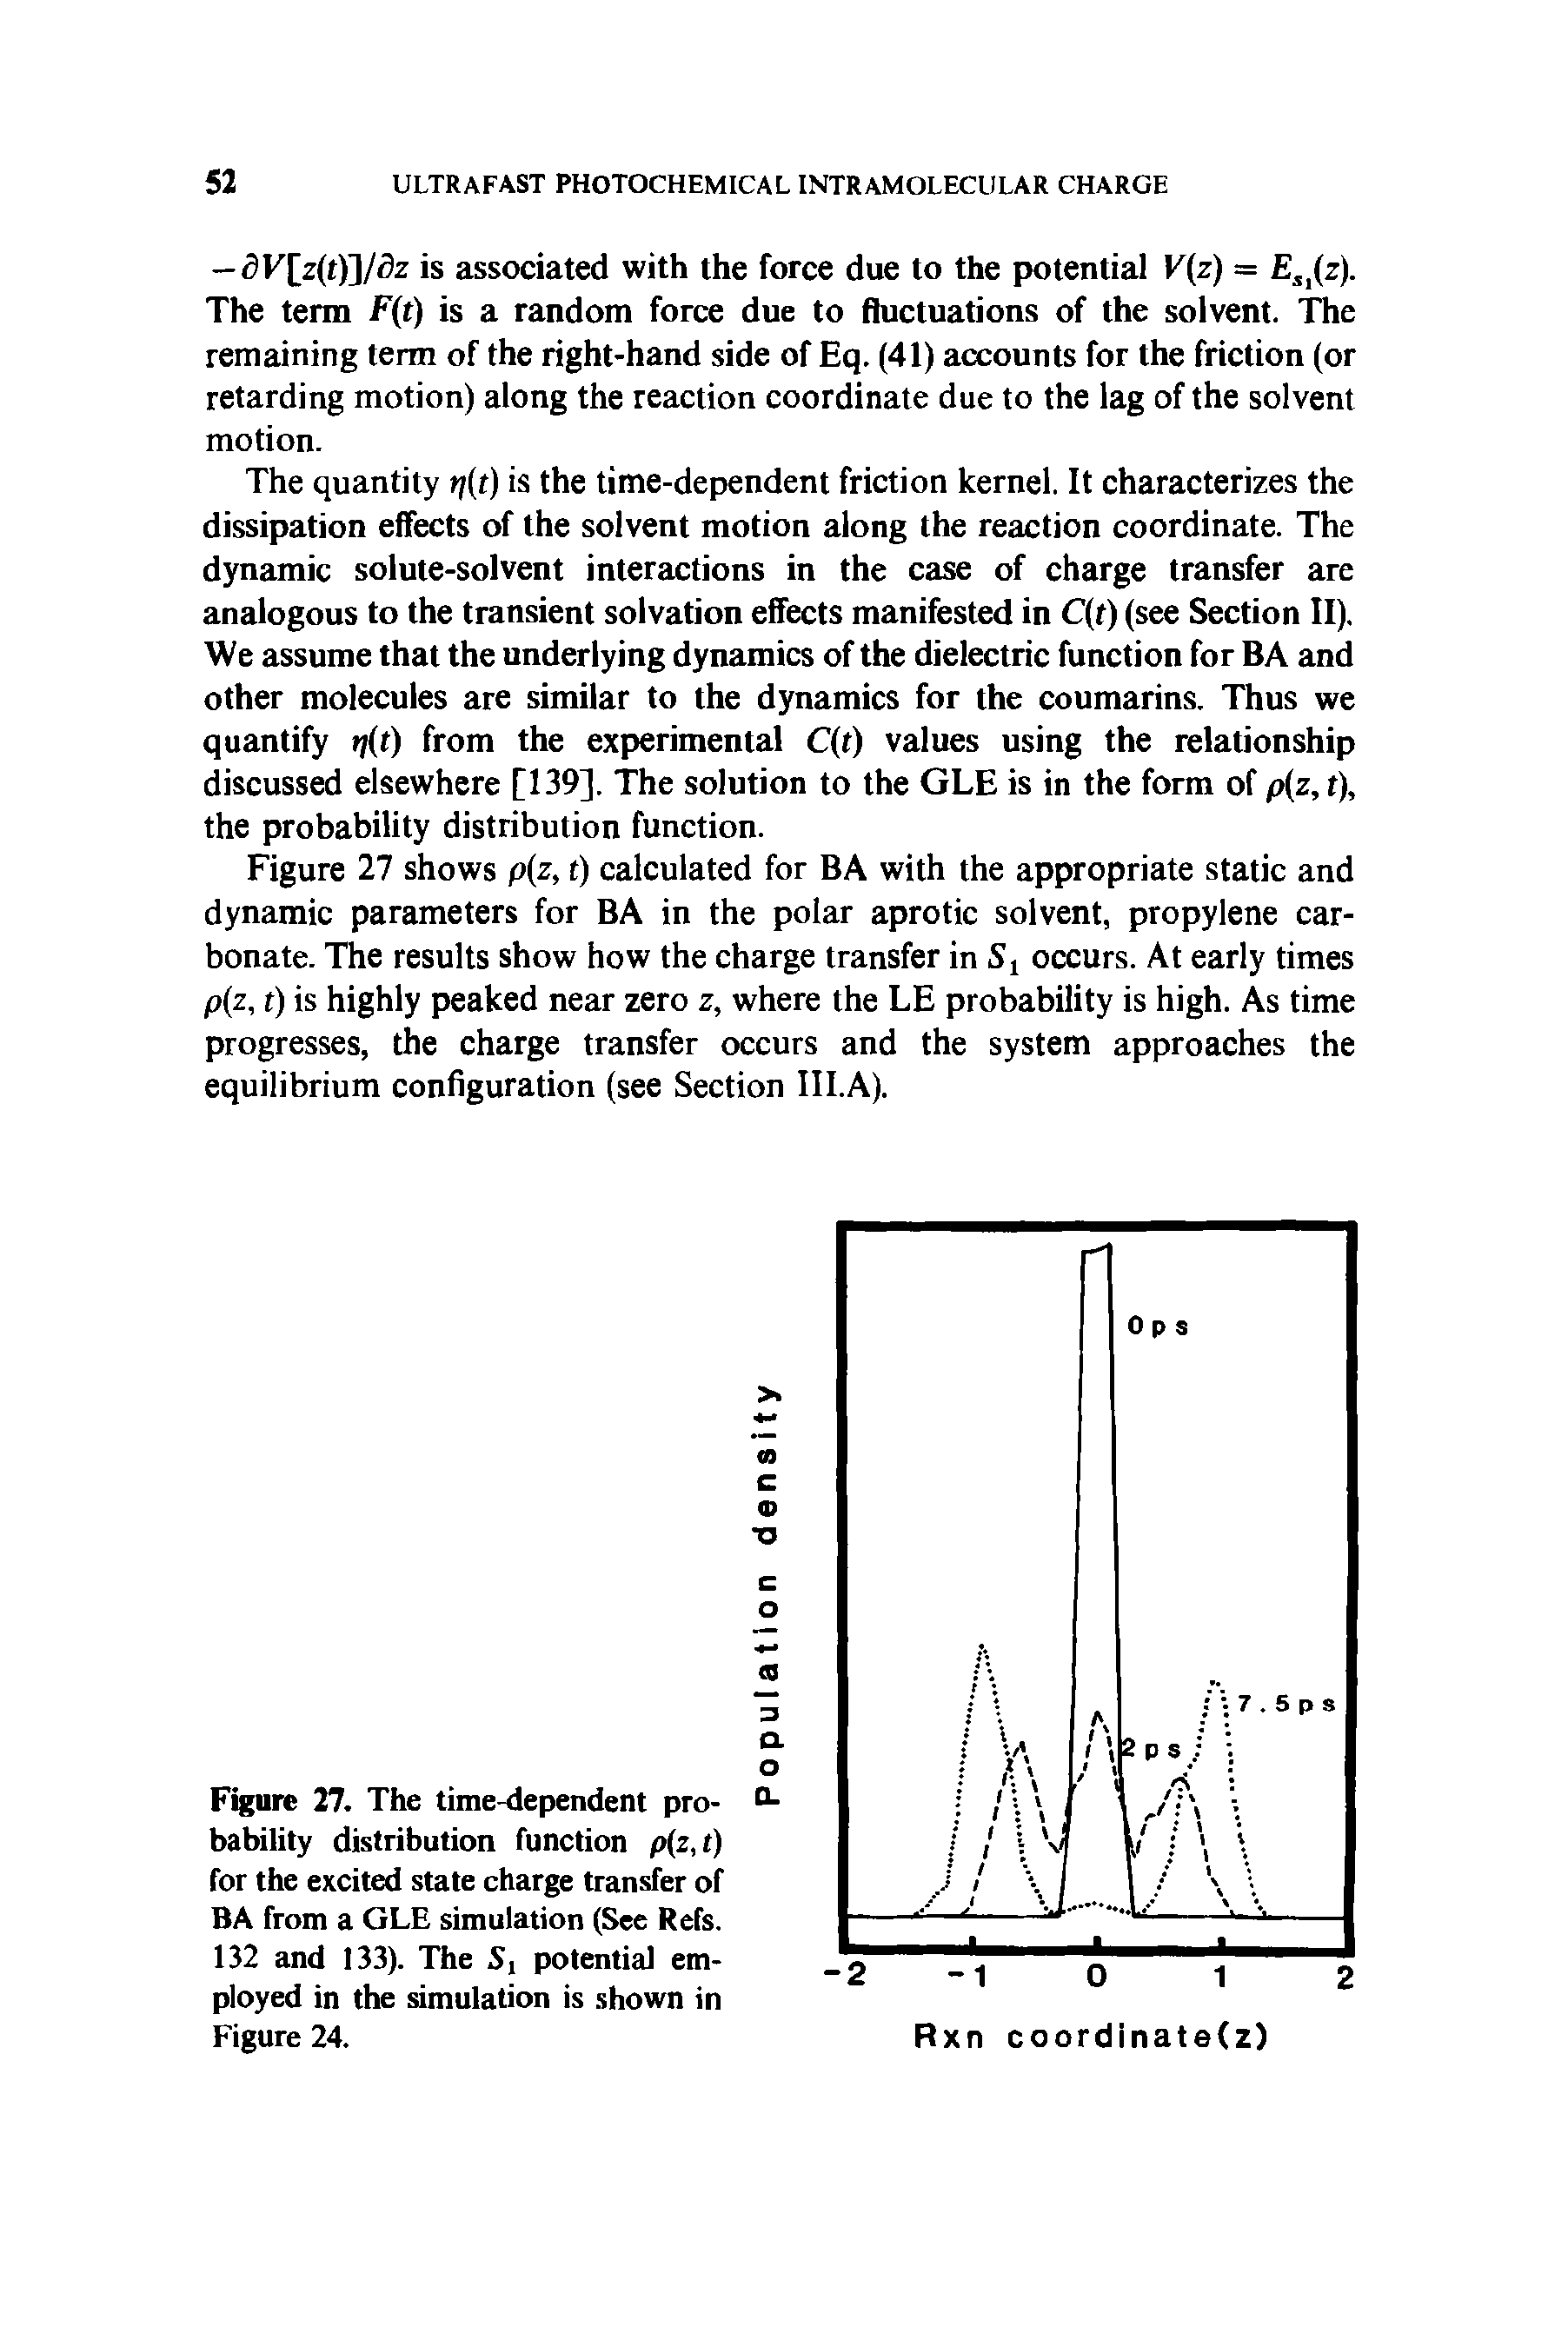 Figure 27. The time-dependent probability distribution function p(z, f) for the excited state charge transfer of BA from a GLE simulation (See Refs. 132 and 133). The 5, potential employed in the simulation is shown in Figure 24.